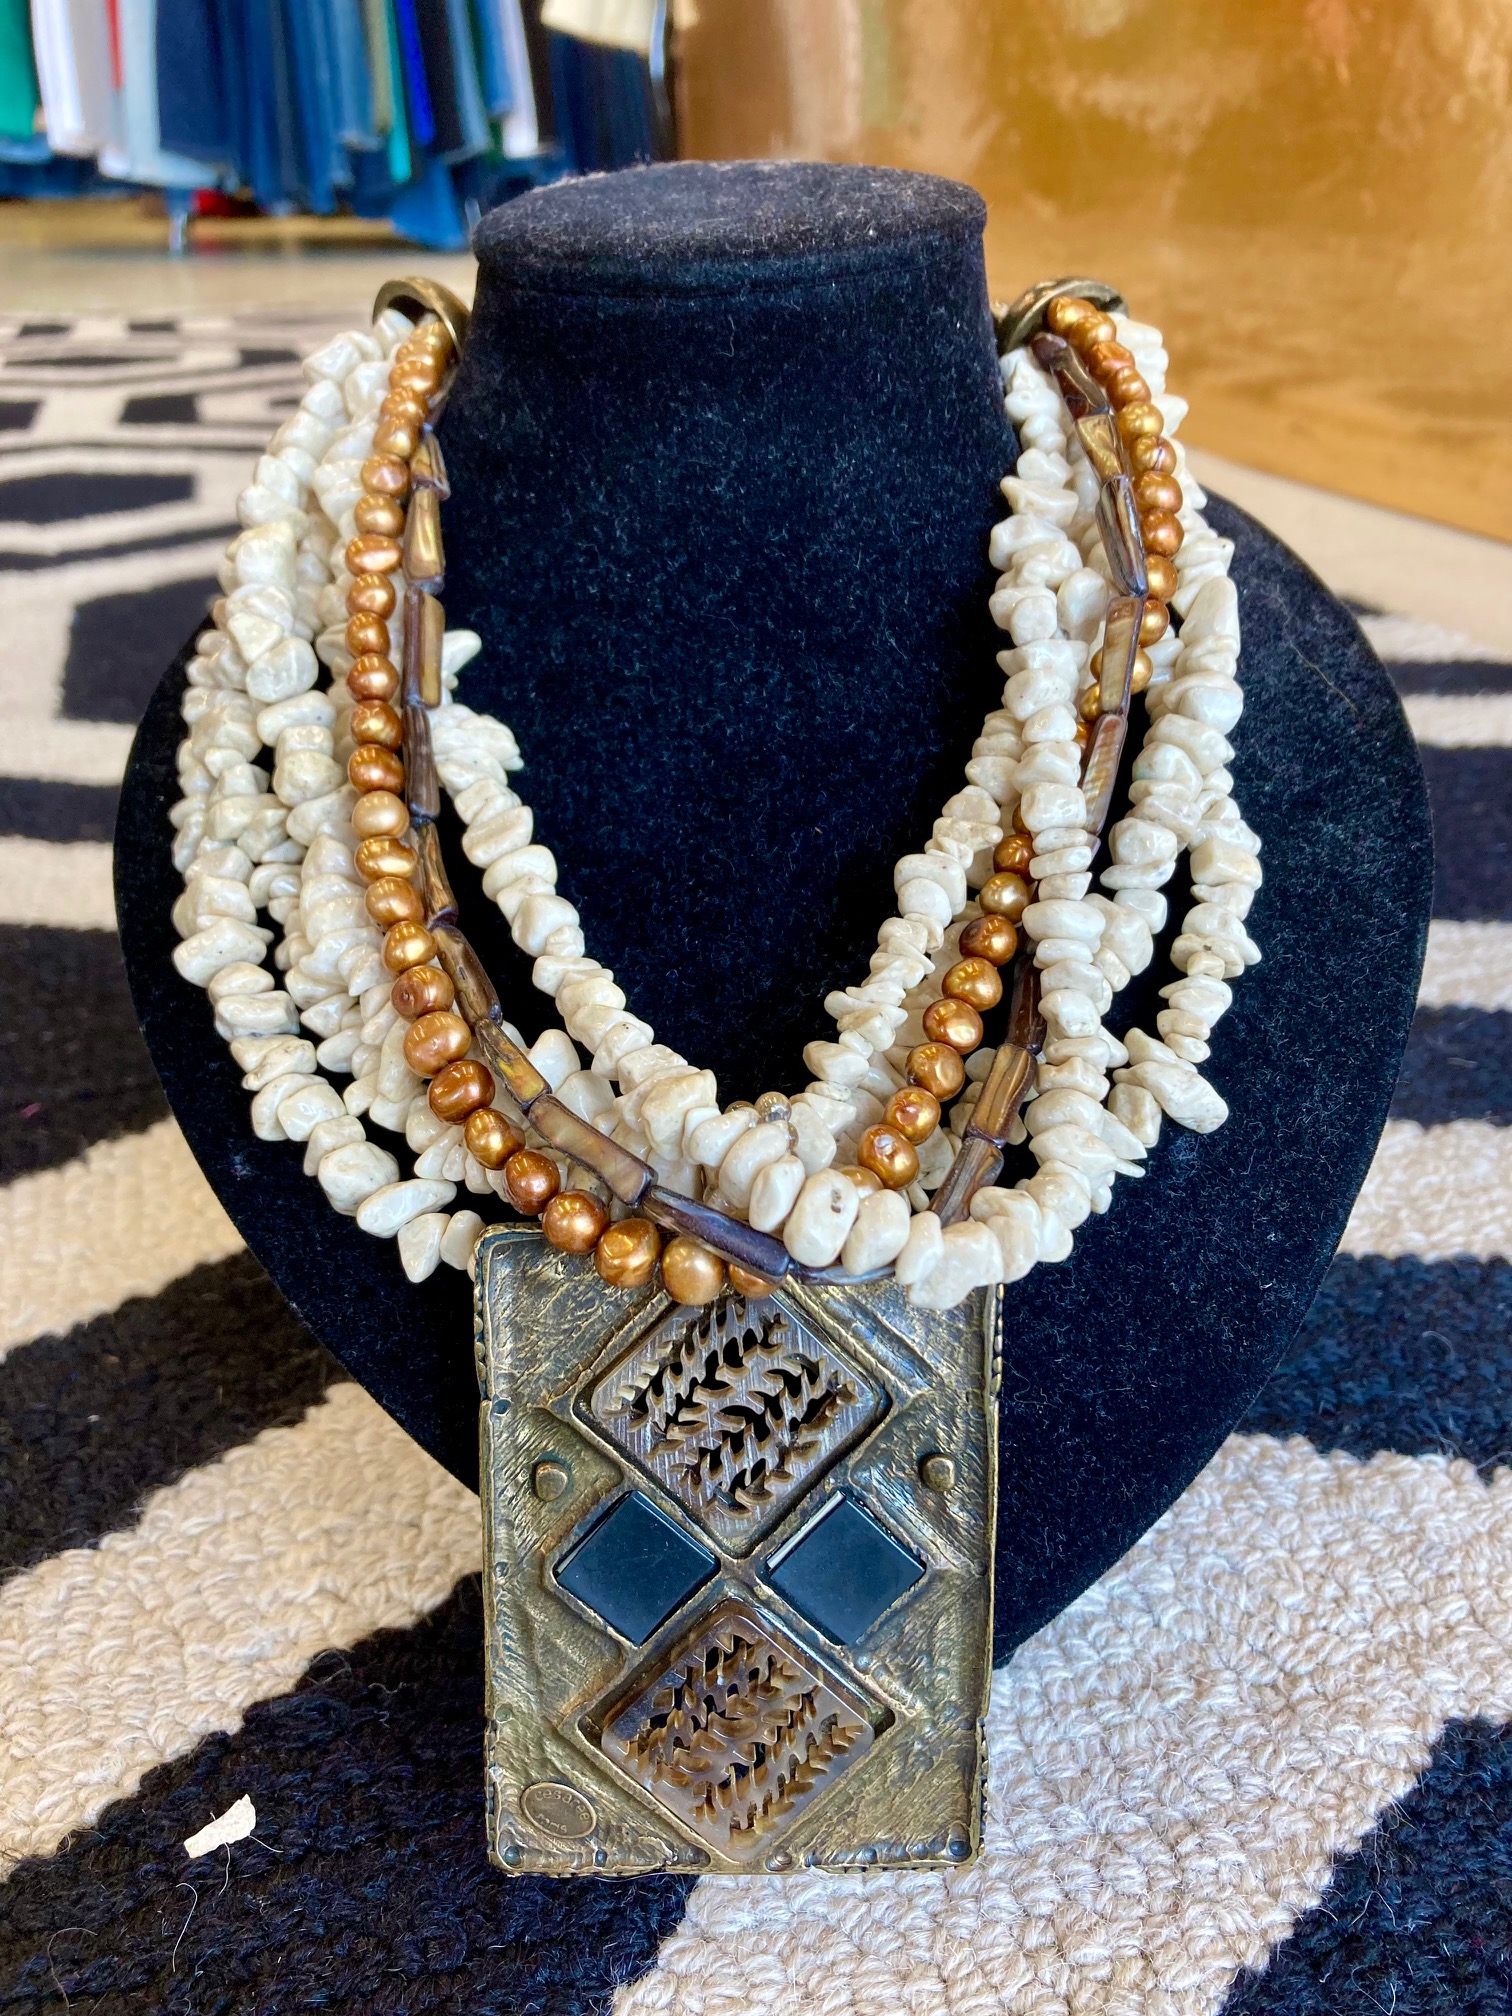 Cesaree Necklace: This one of a kind piece from Paris has beautiful detail and colors.  Natural stones and intricate medallion.  Ivory and citrine colors with bronze.